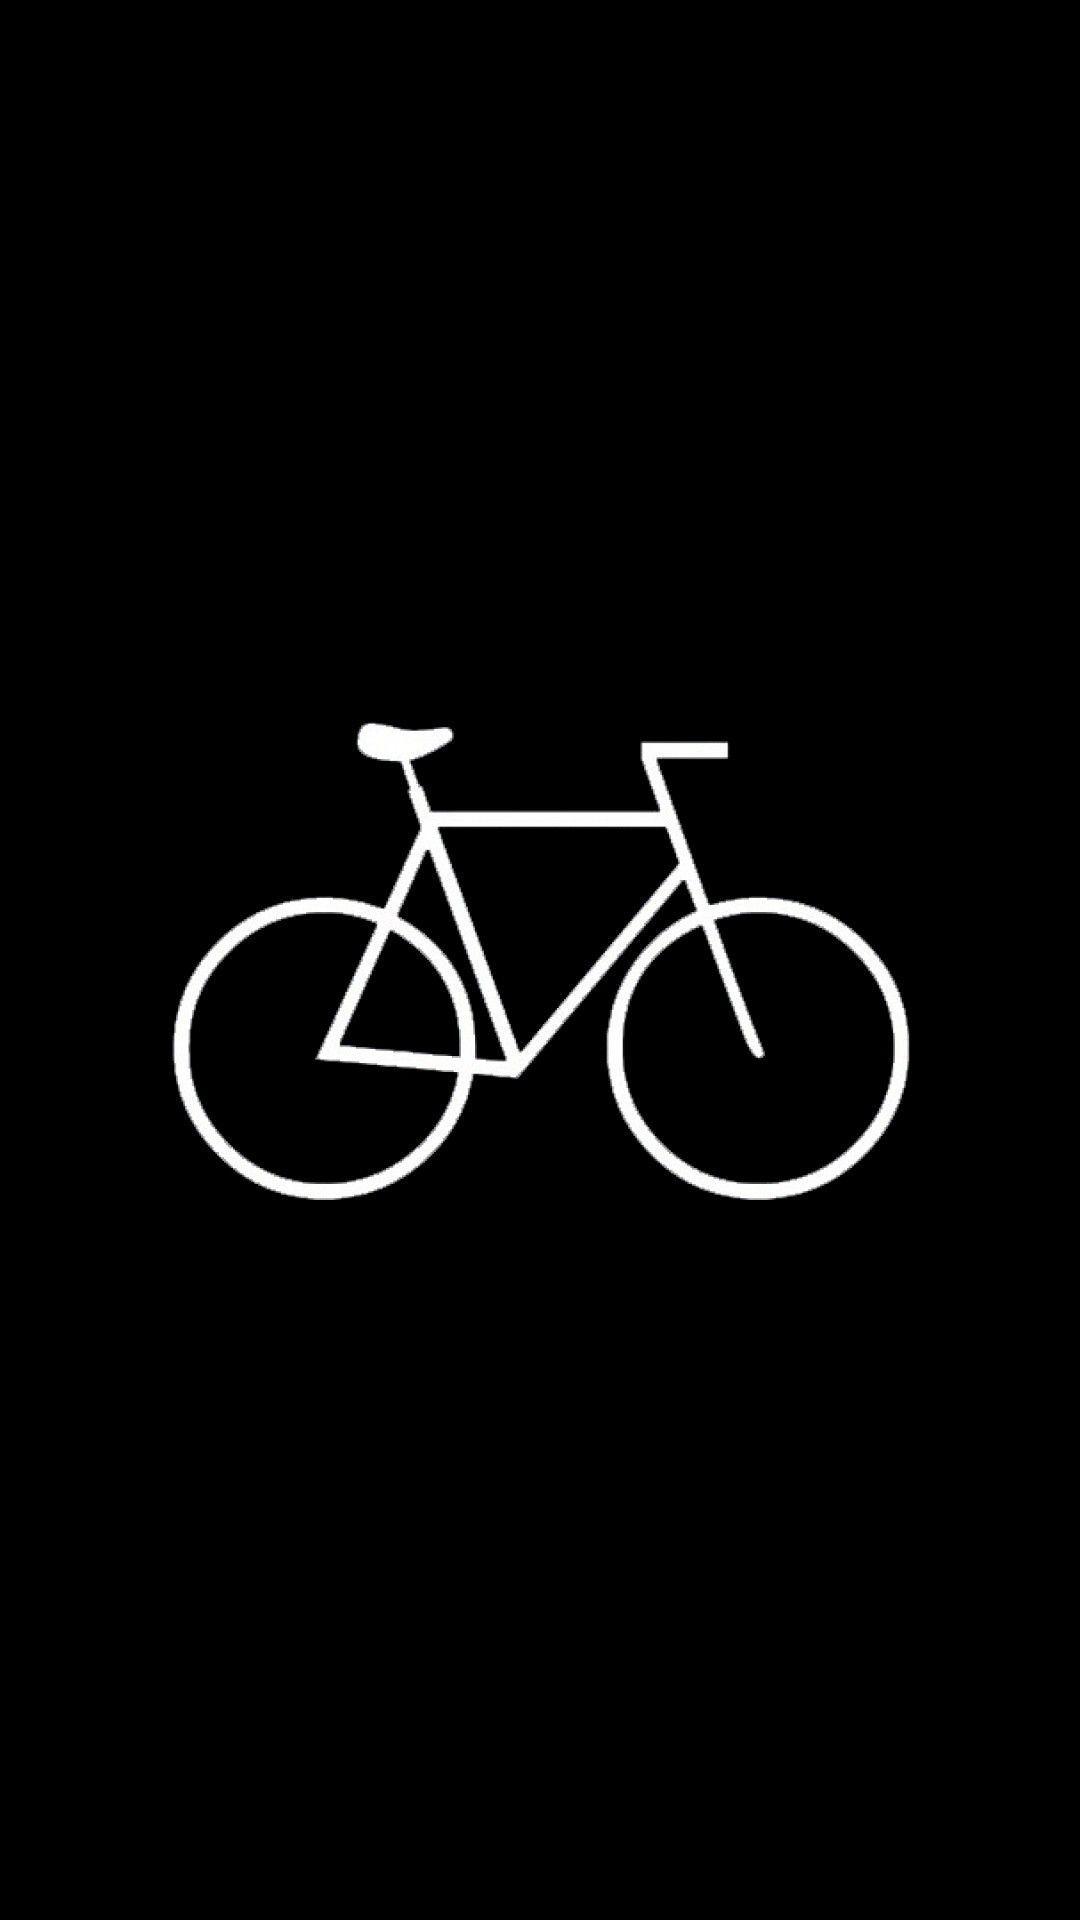 Cars & Bikes iPhone 6 Plus Wallpaper Simple Bicycle Hipster